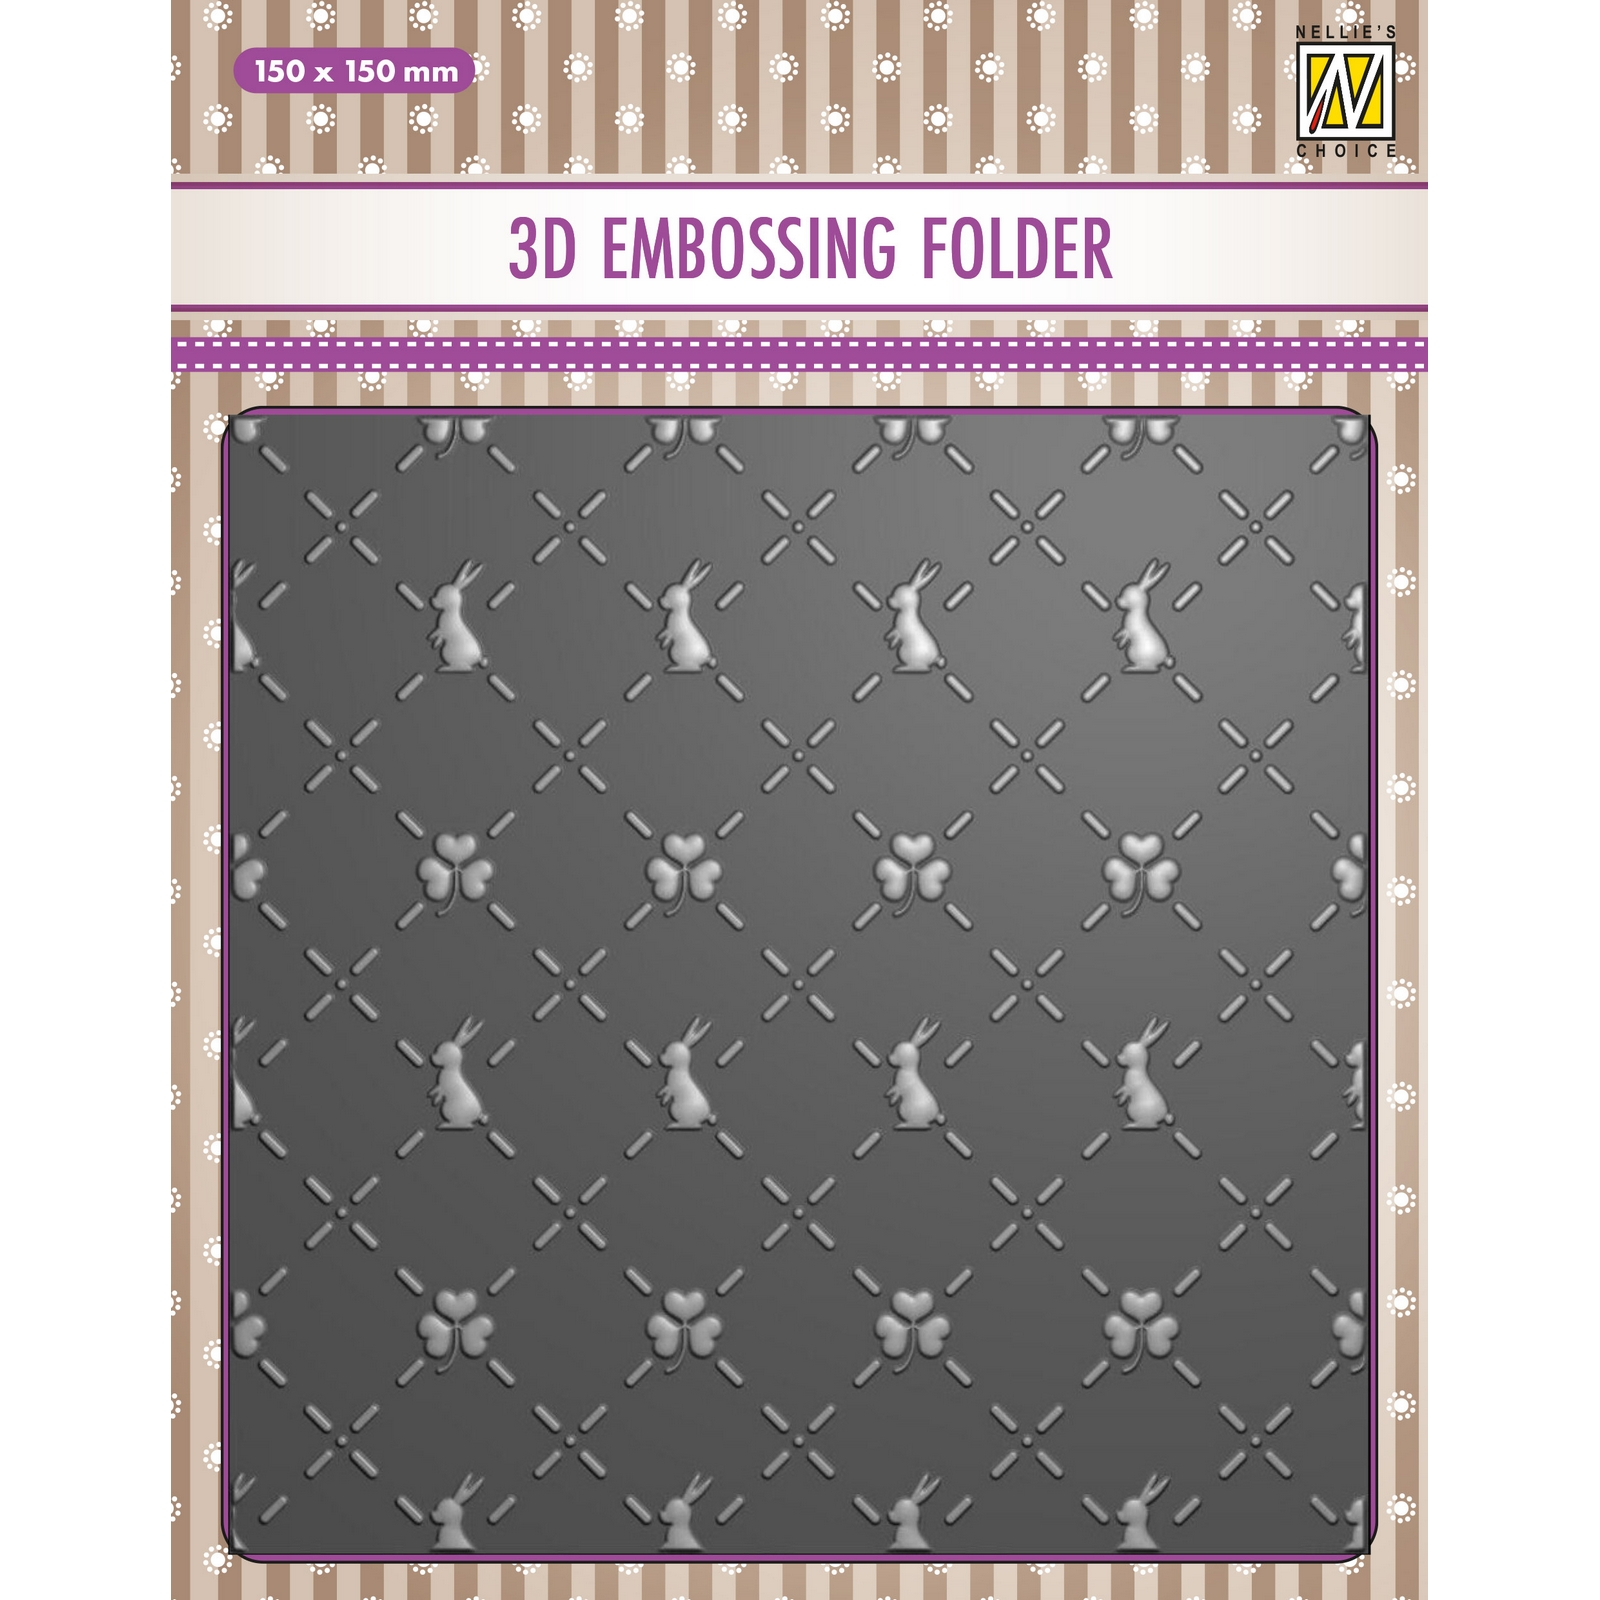 Nellie's Choice • 3D Embossing Folder Bunny's and Clovers